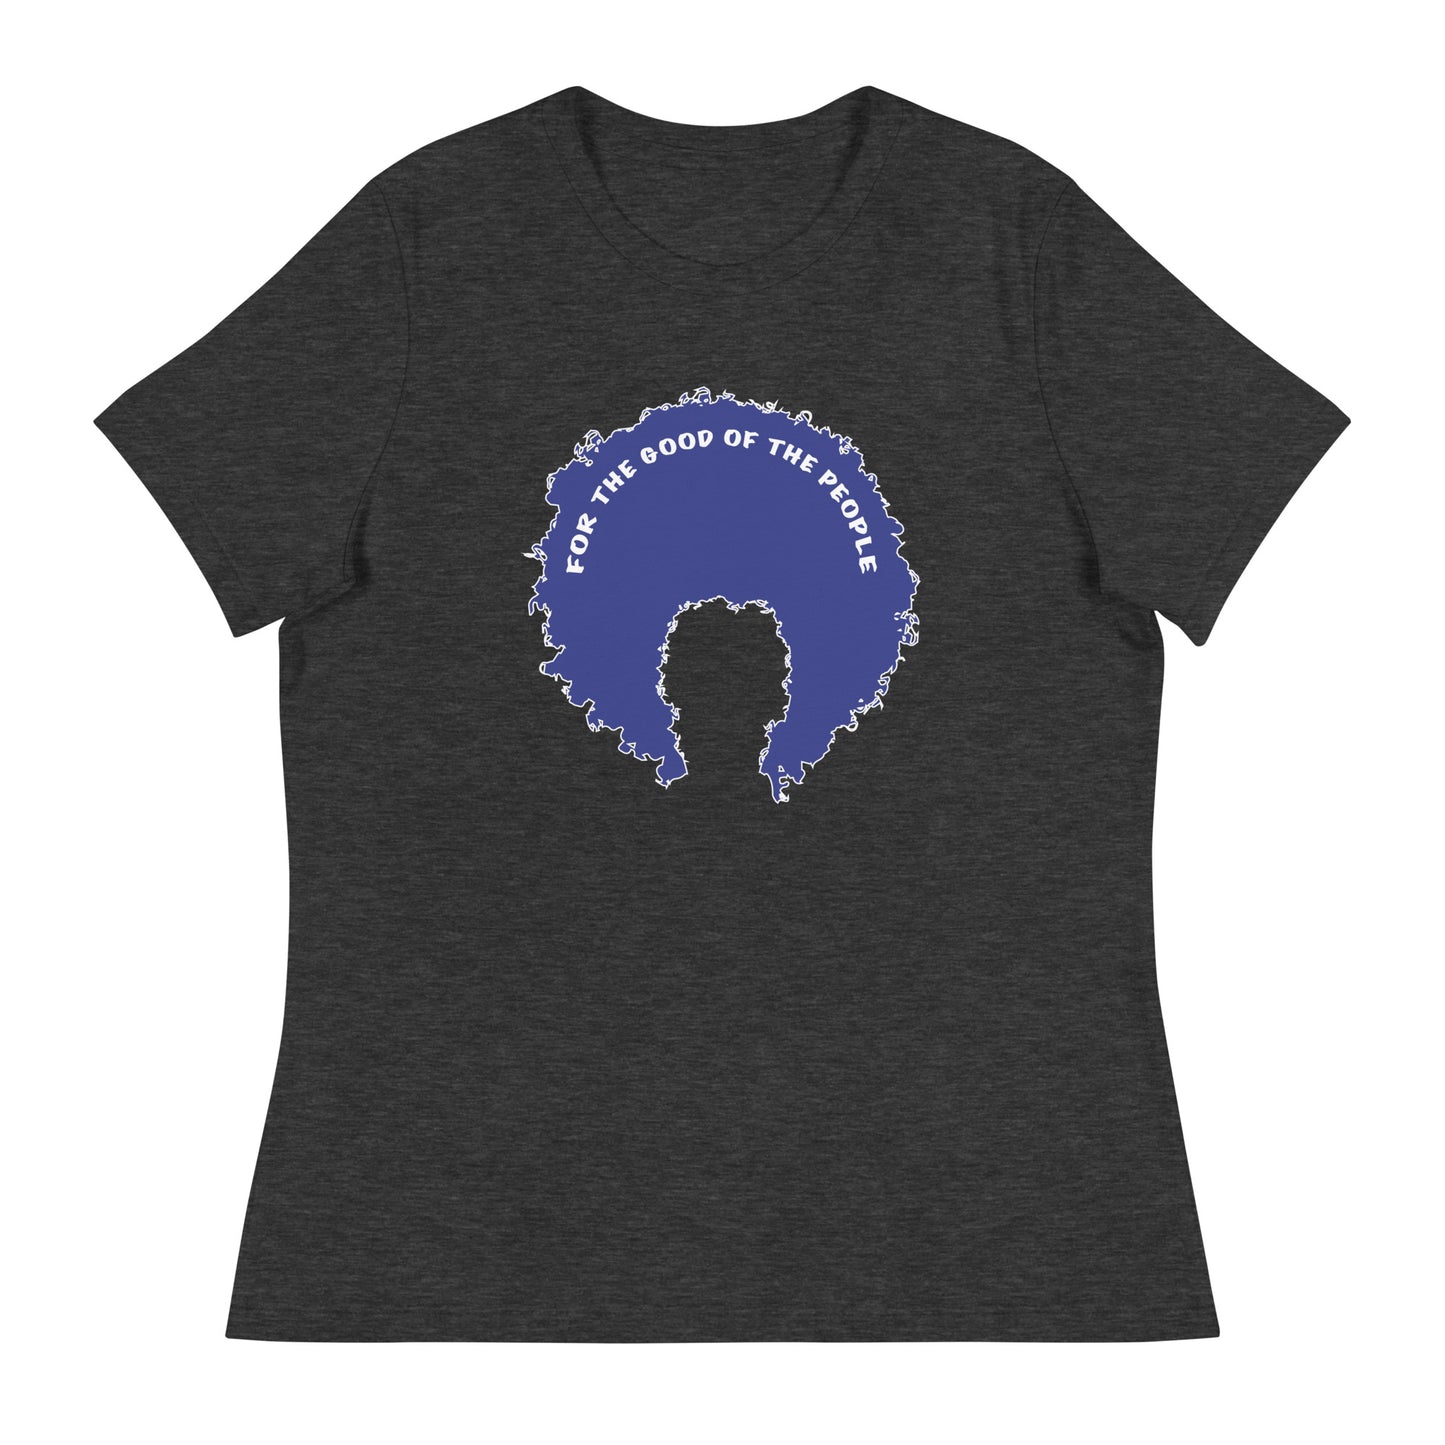 Dark heather gray women's tee with blue afro graphic trimmed in white with for the good of the people in white on the inside top of the afro.